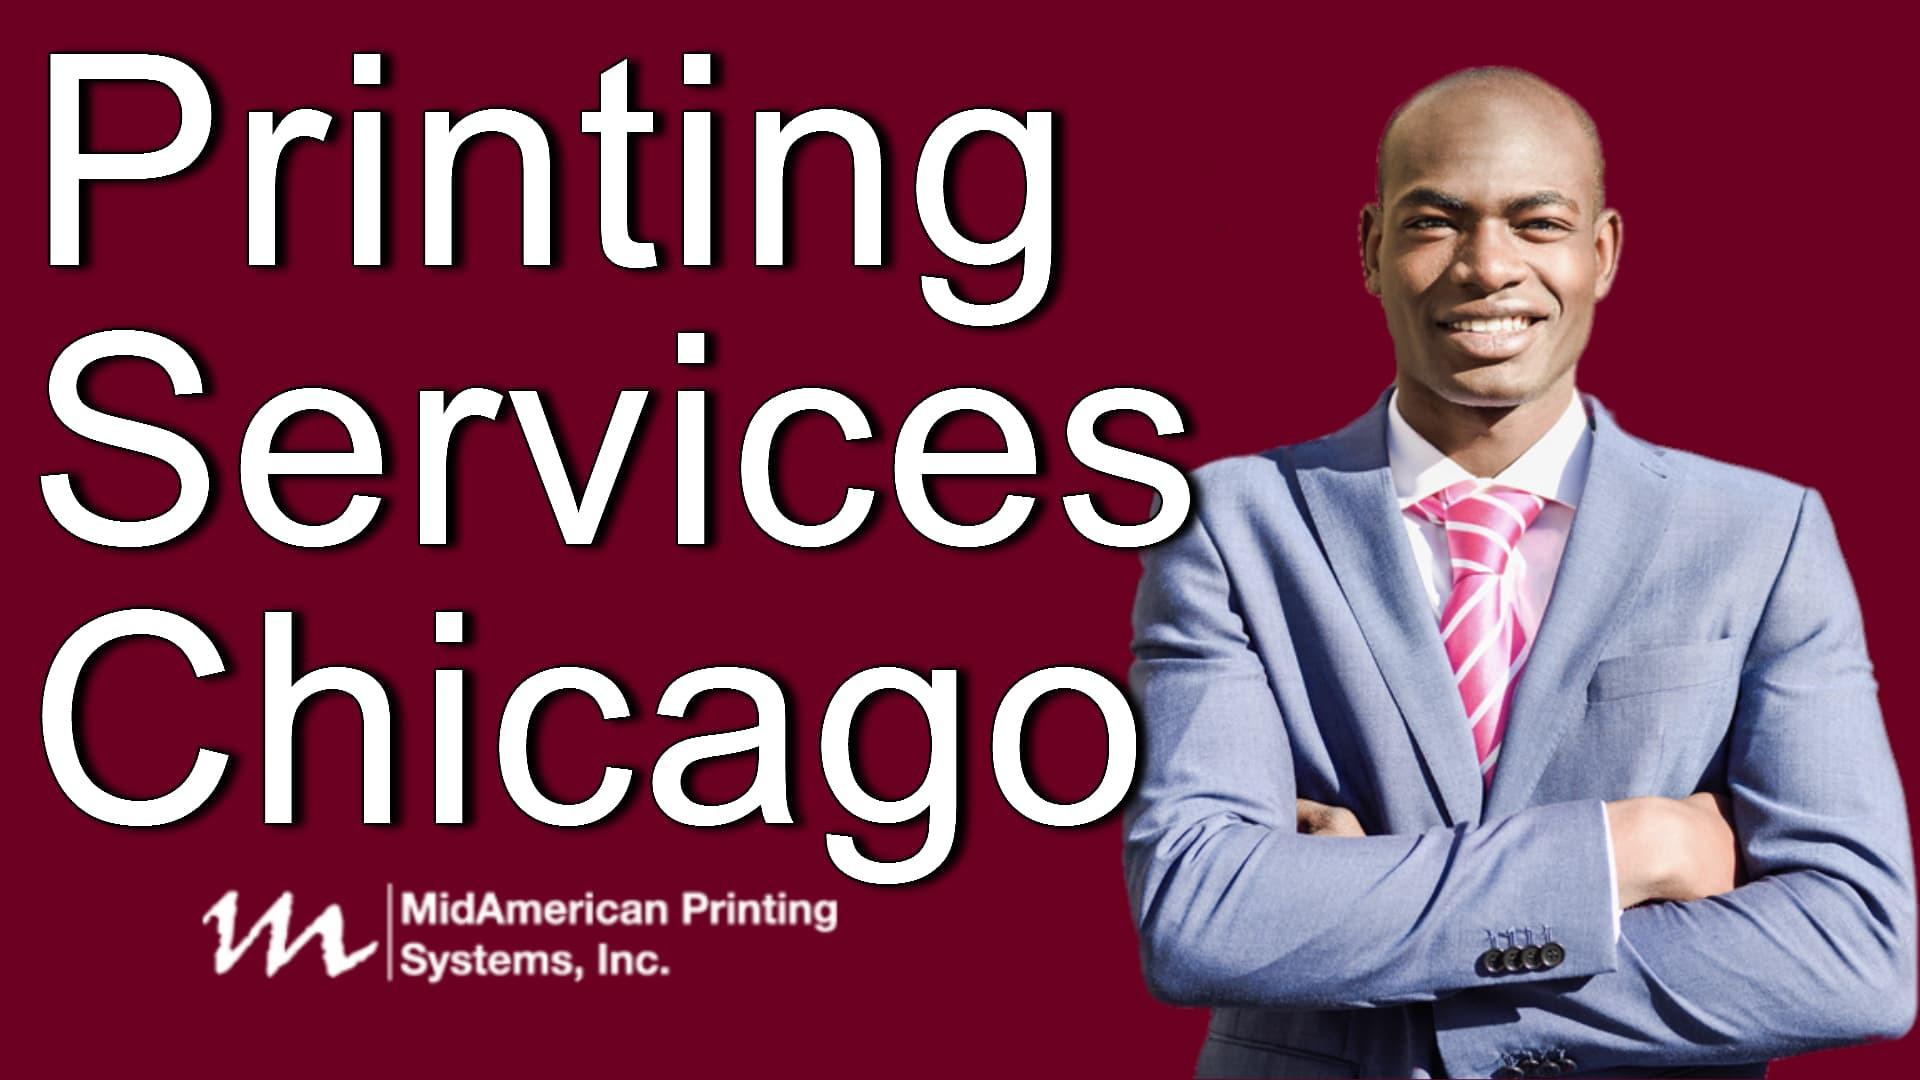 Product Printing services from MidAmericanPrinting Chicago image